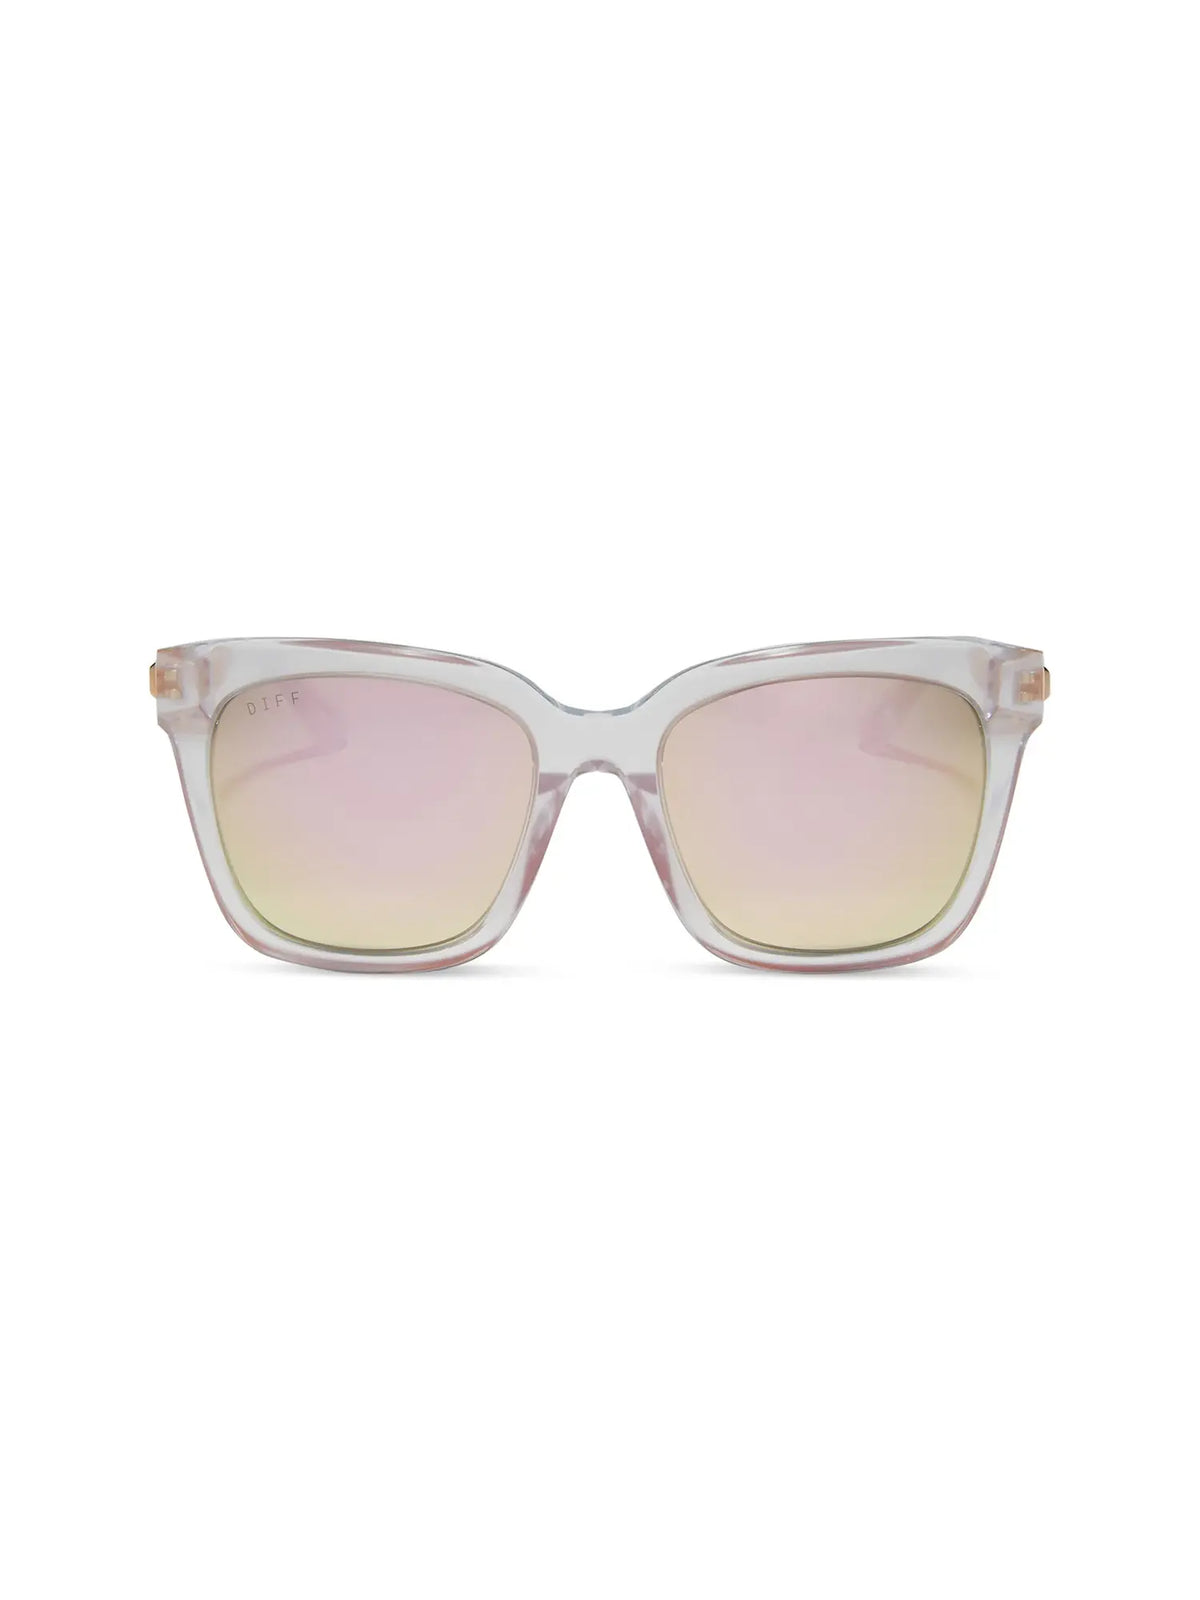 DIFF eyewear bella sunglasses in opalescent pink and cherry blossom mirror